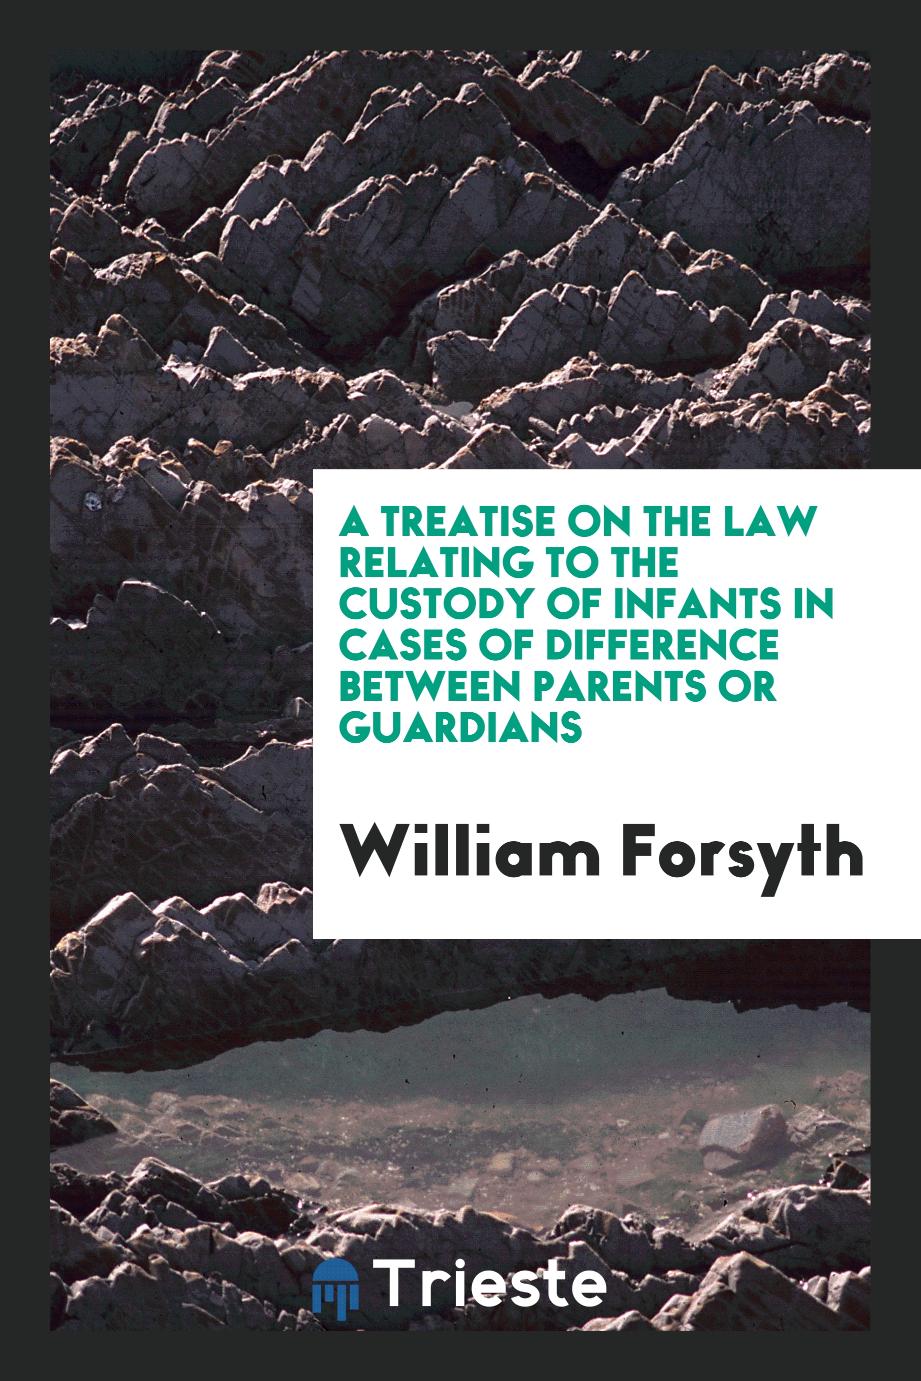 A Treatise on the Law Relating to the Custody of Infants in Cases of Difference between Parents or Guardians